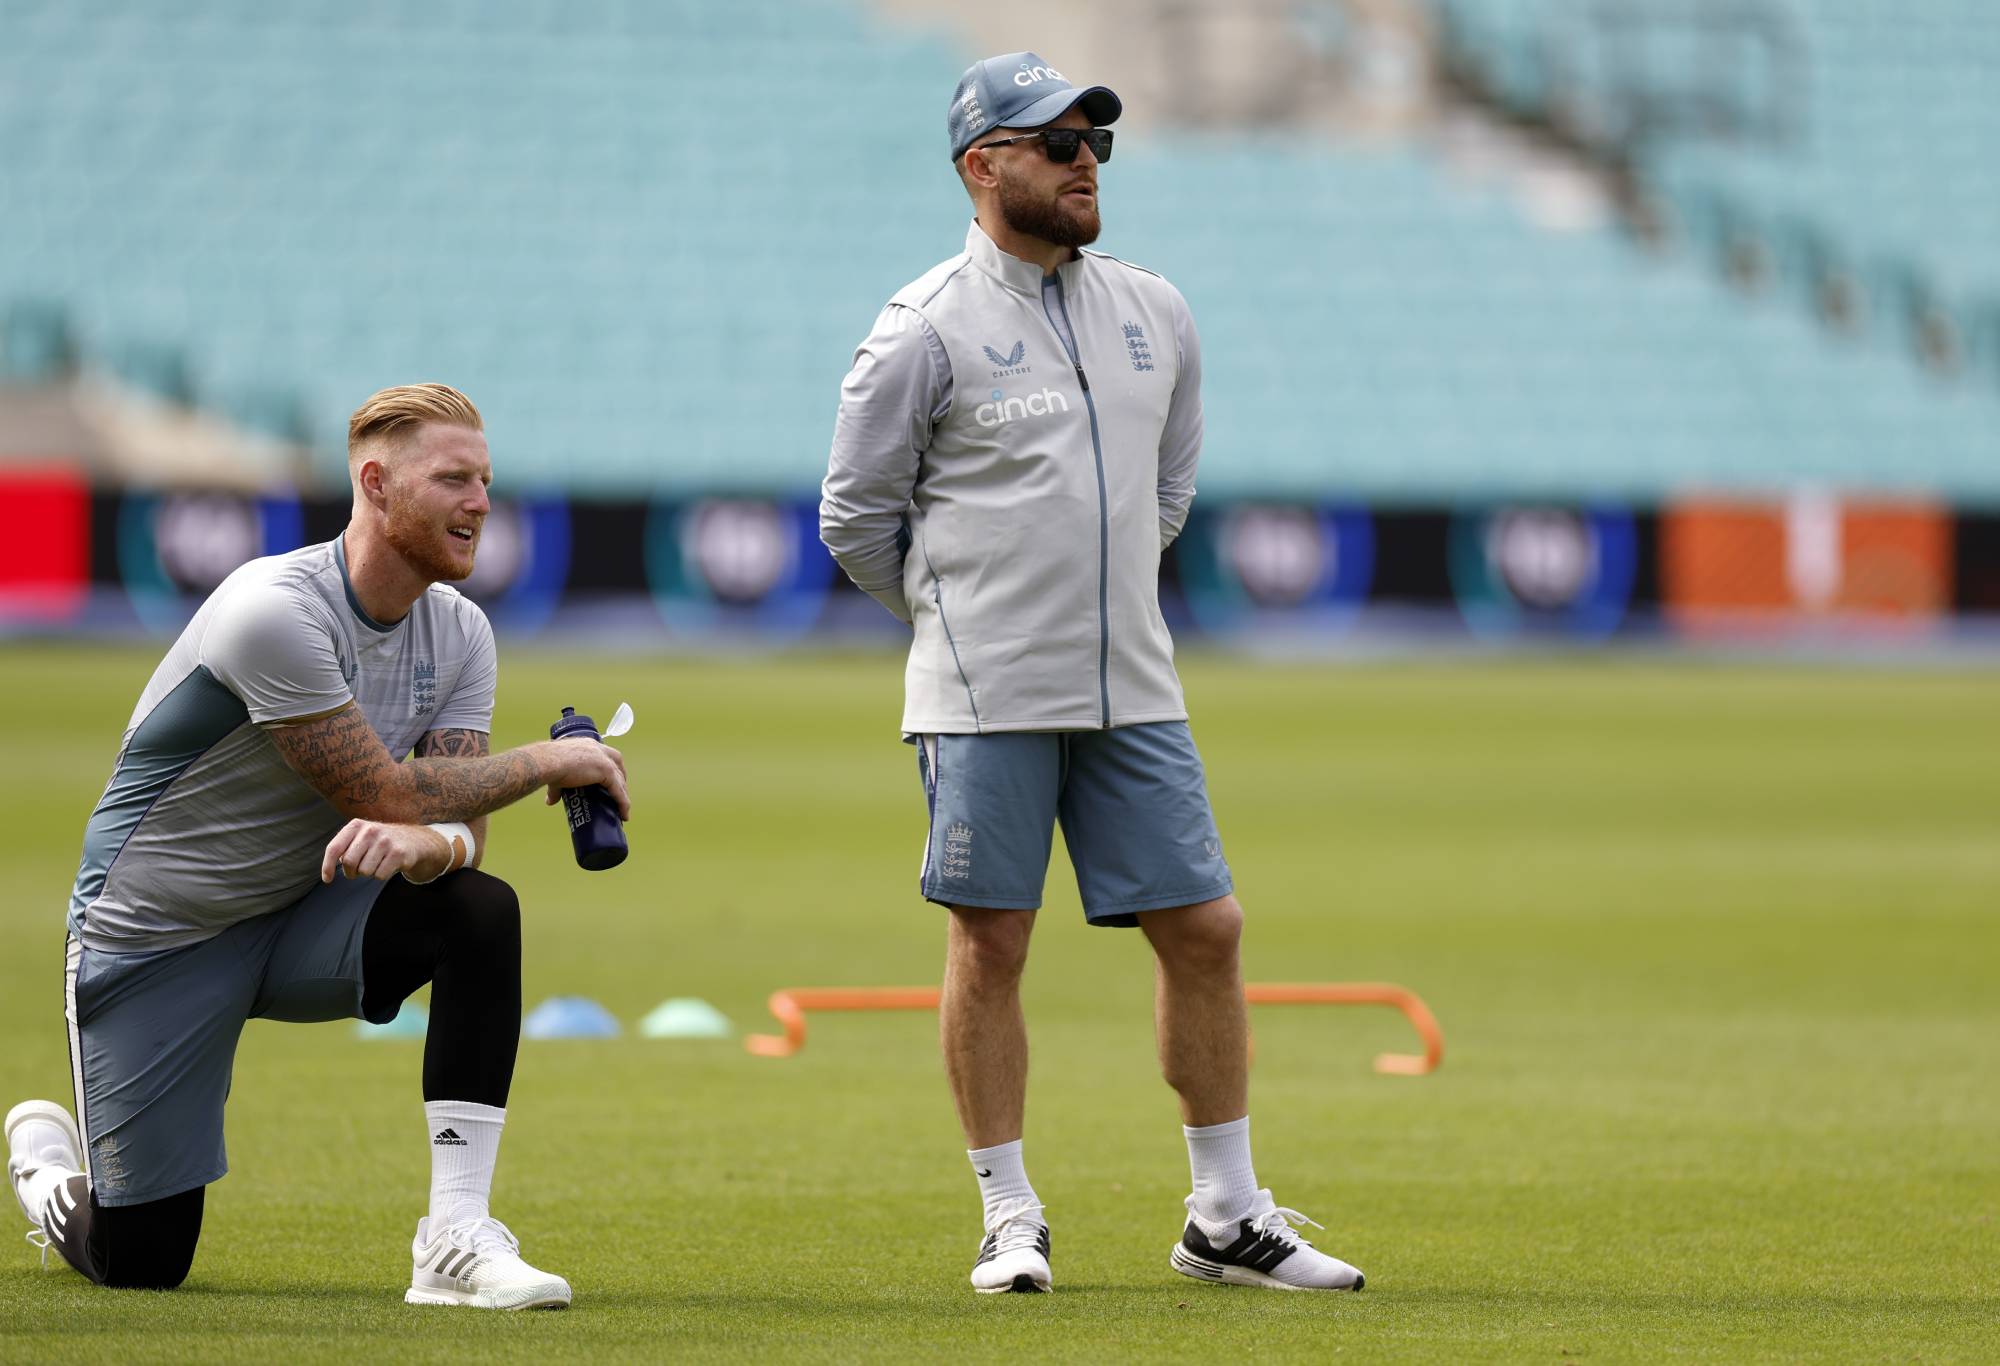 England captain Ben Stokes and head coach Brendon McCullum during at nets session at the Kia Oval, London. Picture date: Tuesday September 6, 2022. (Photo by Steven Paston/PA Images via Getty Images)